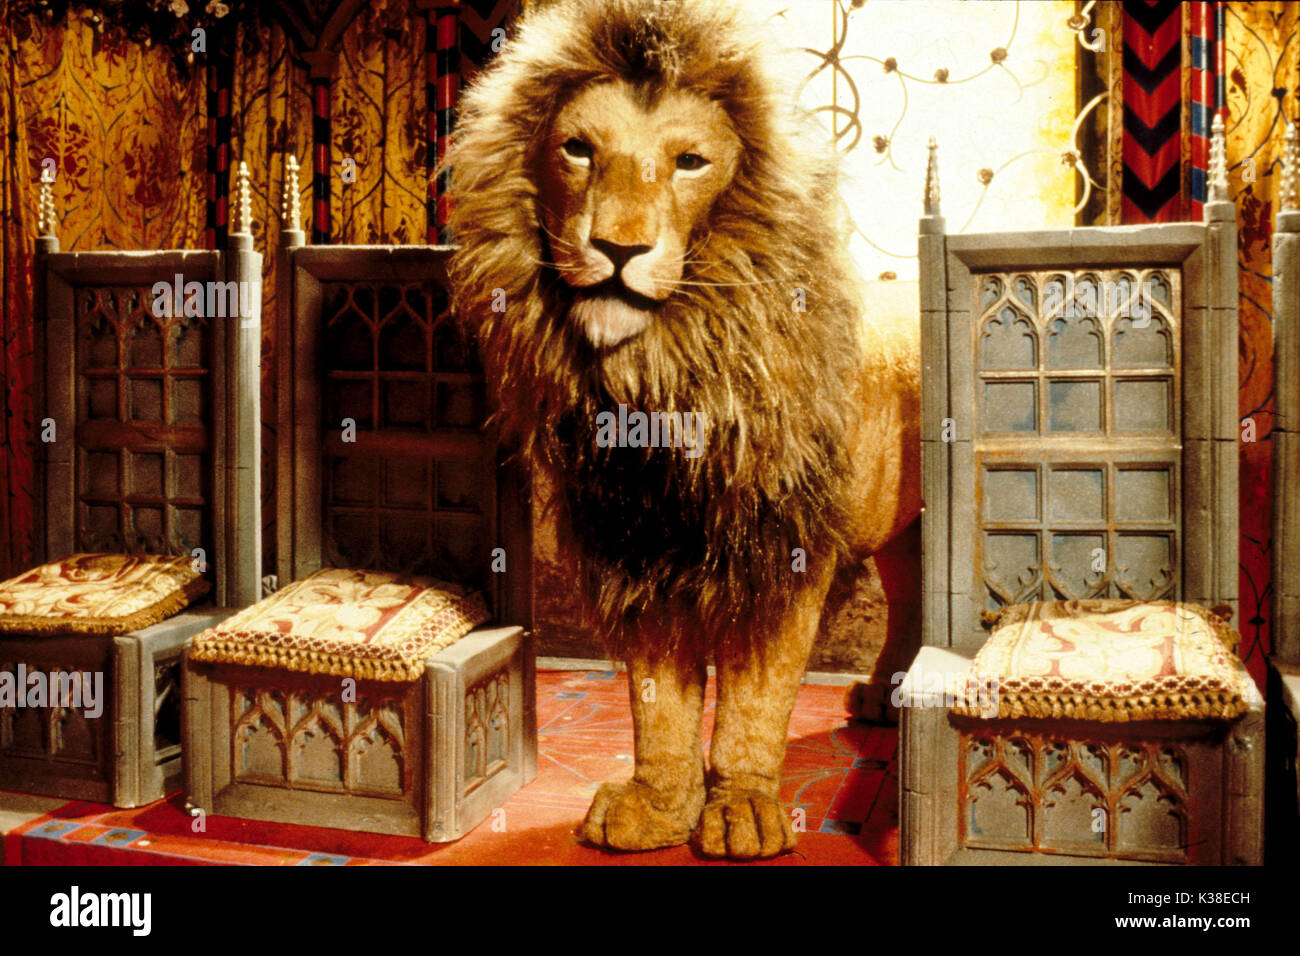 THE LION, THE WITCH AND THE WARDROBE [BBC TV 1988] PICTURE FROM THE RONALD  GRANT ARCHIVE PLEASE CREDIT BBC NARNIA CHRONICLES: THE LION, THE WITCH AND  THE WARDROBE [BBC TV 1988] FILED